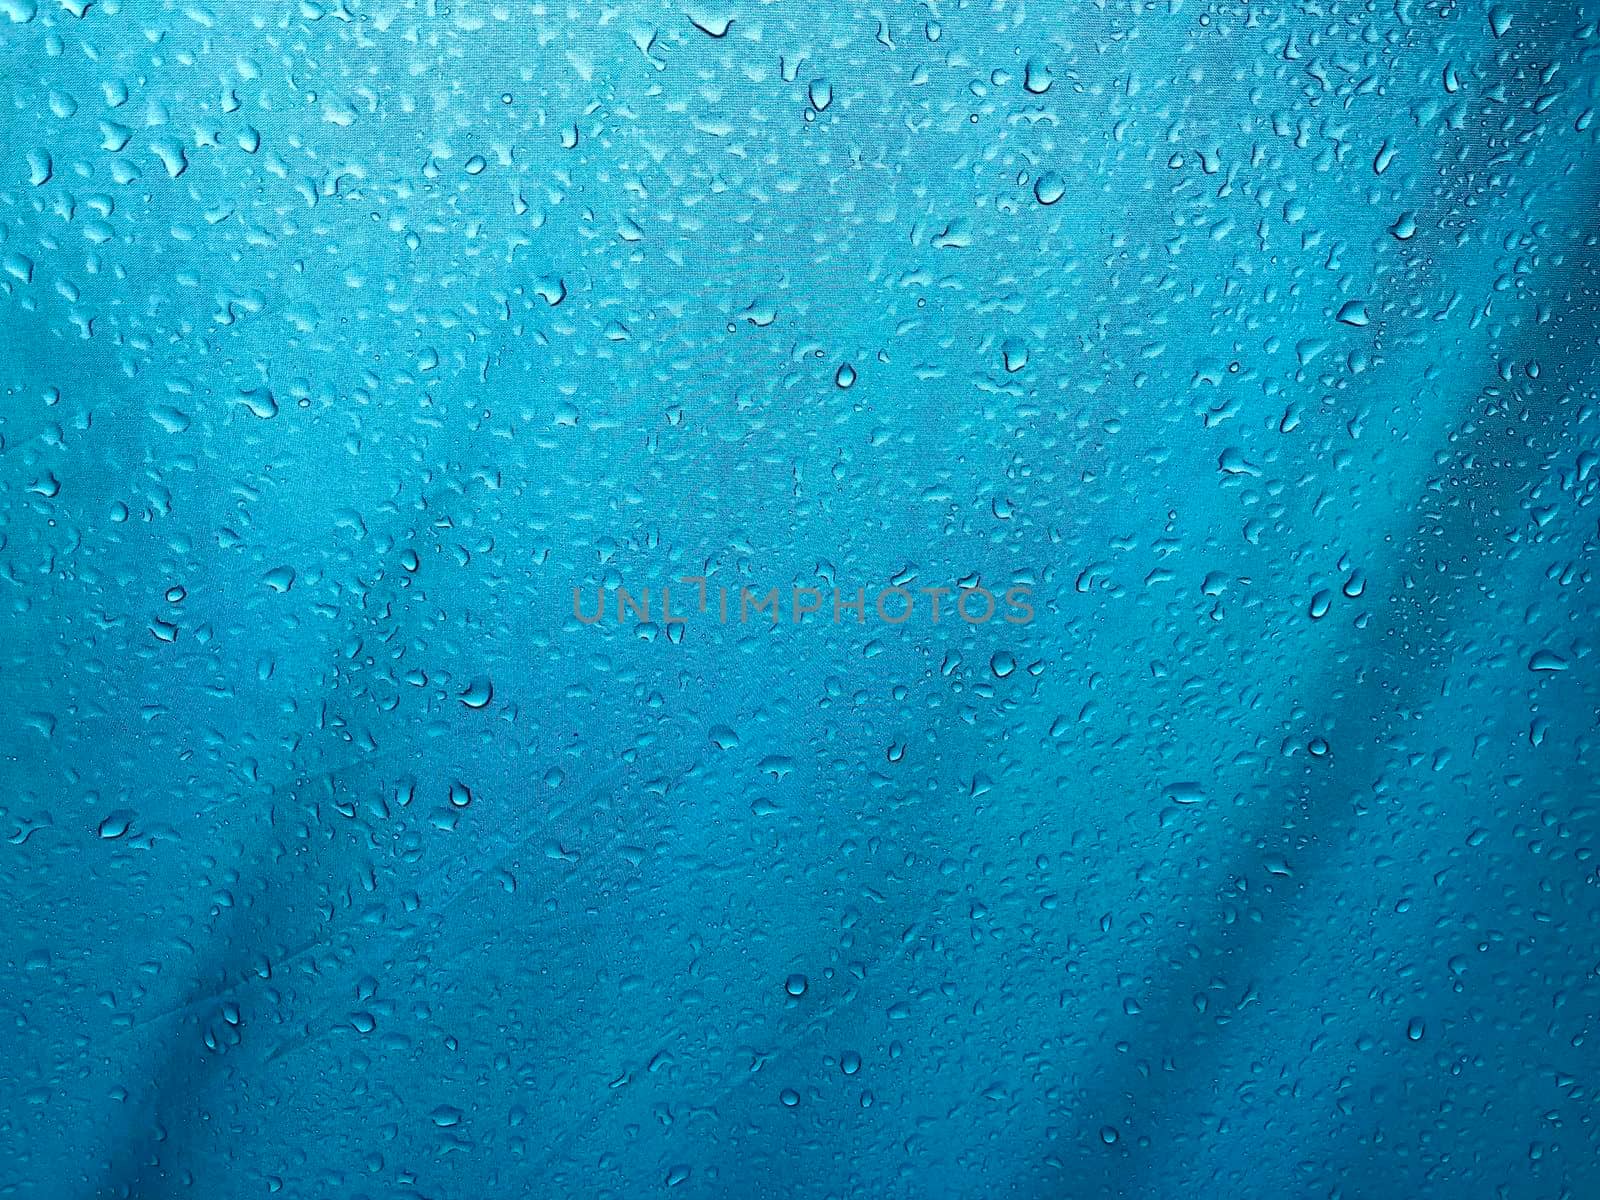 Drops down on the blue canvas floor. Abstract background by noppha80